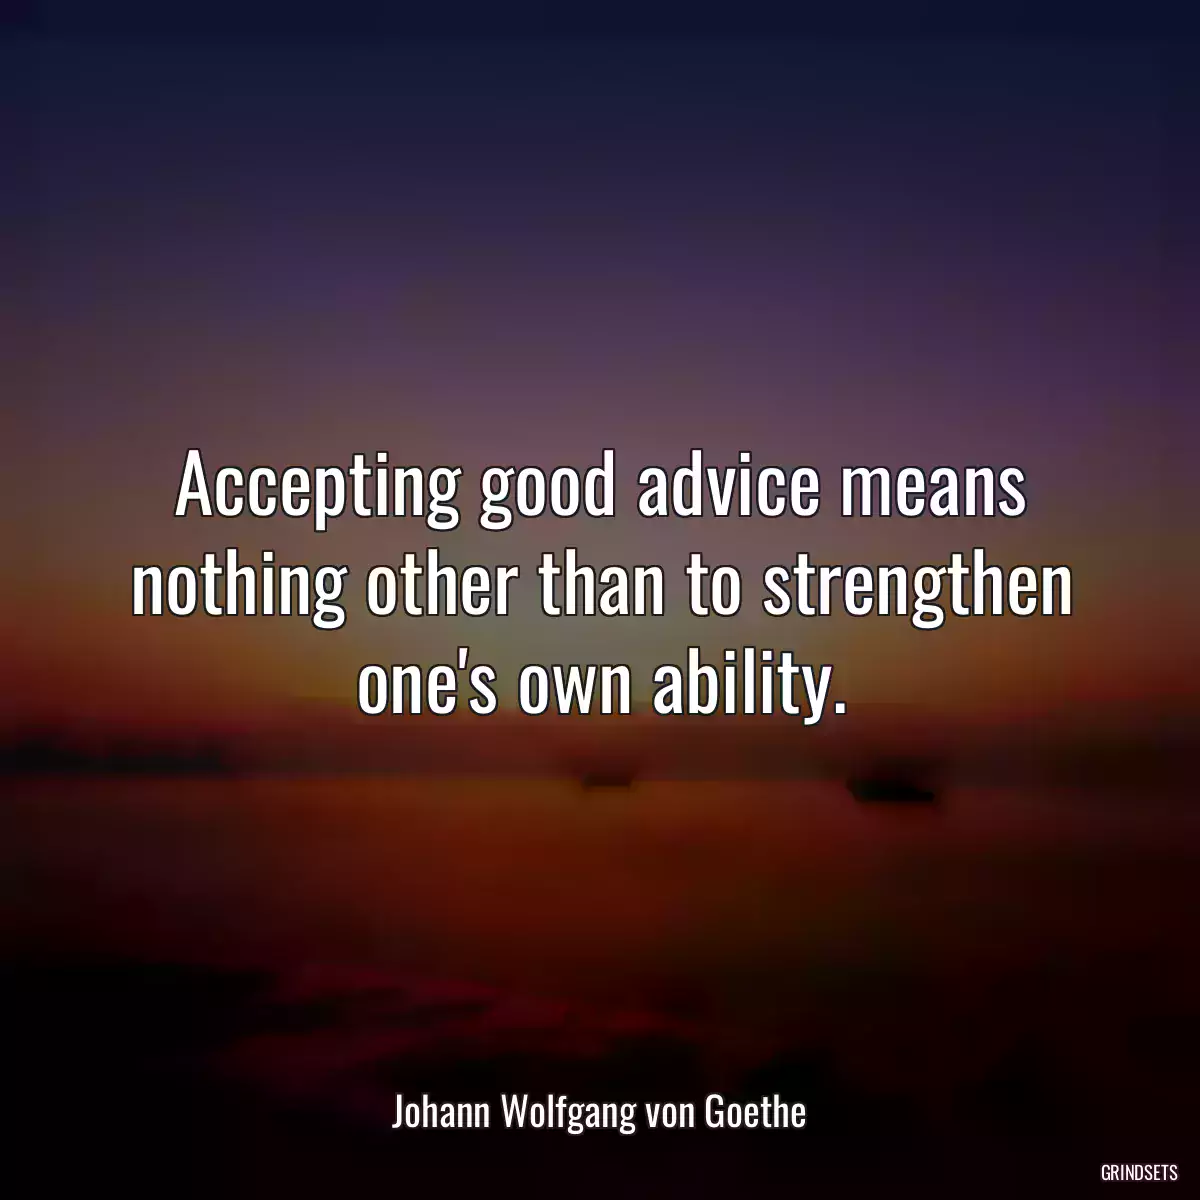 Accepting good advice means nothing other than to strengthen one\'s own ability.